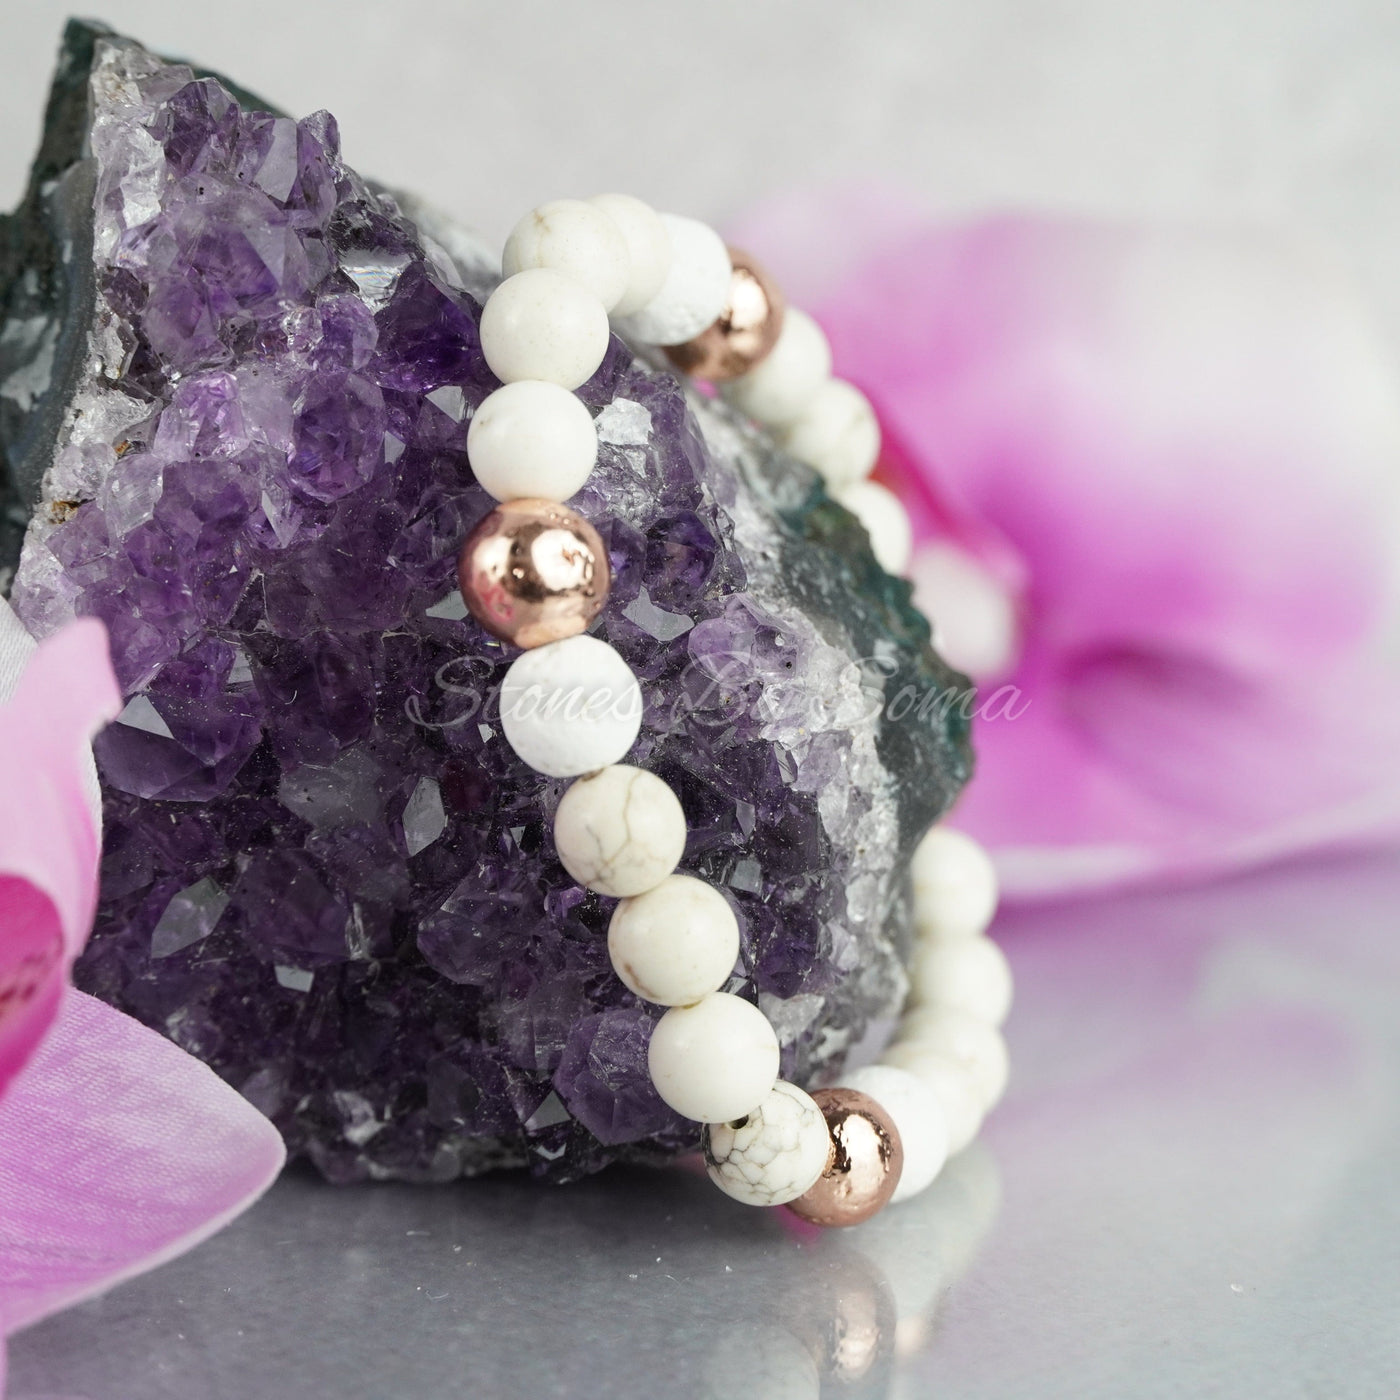 White Turquoise, Rose Gold & White Lava Bead (Anxiety & Stress Relief)